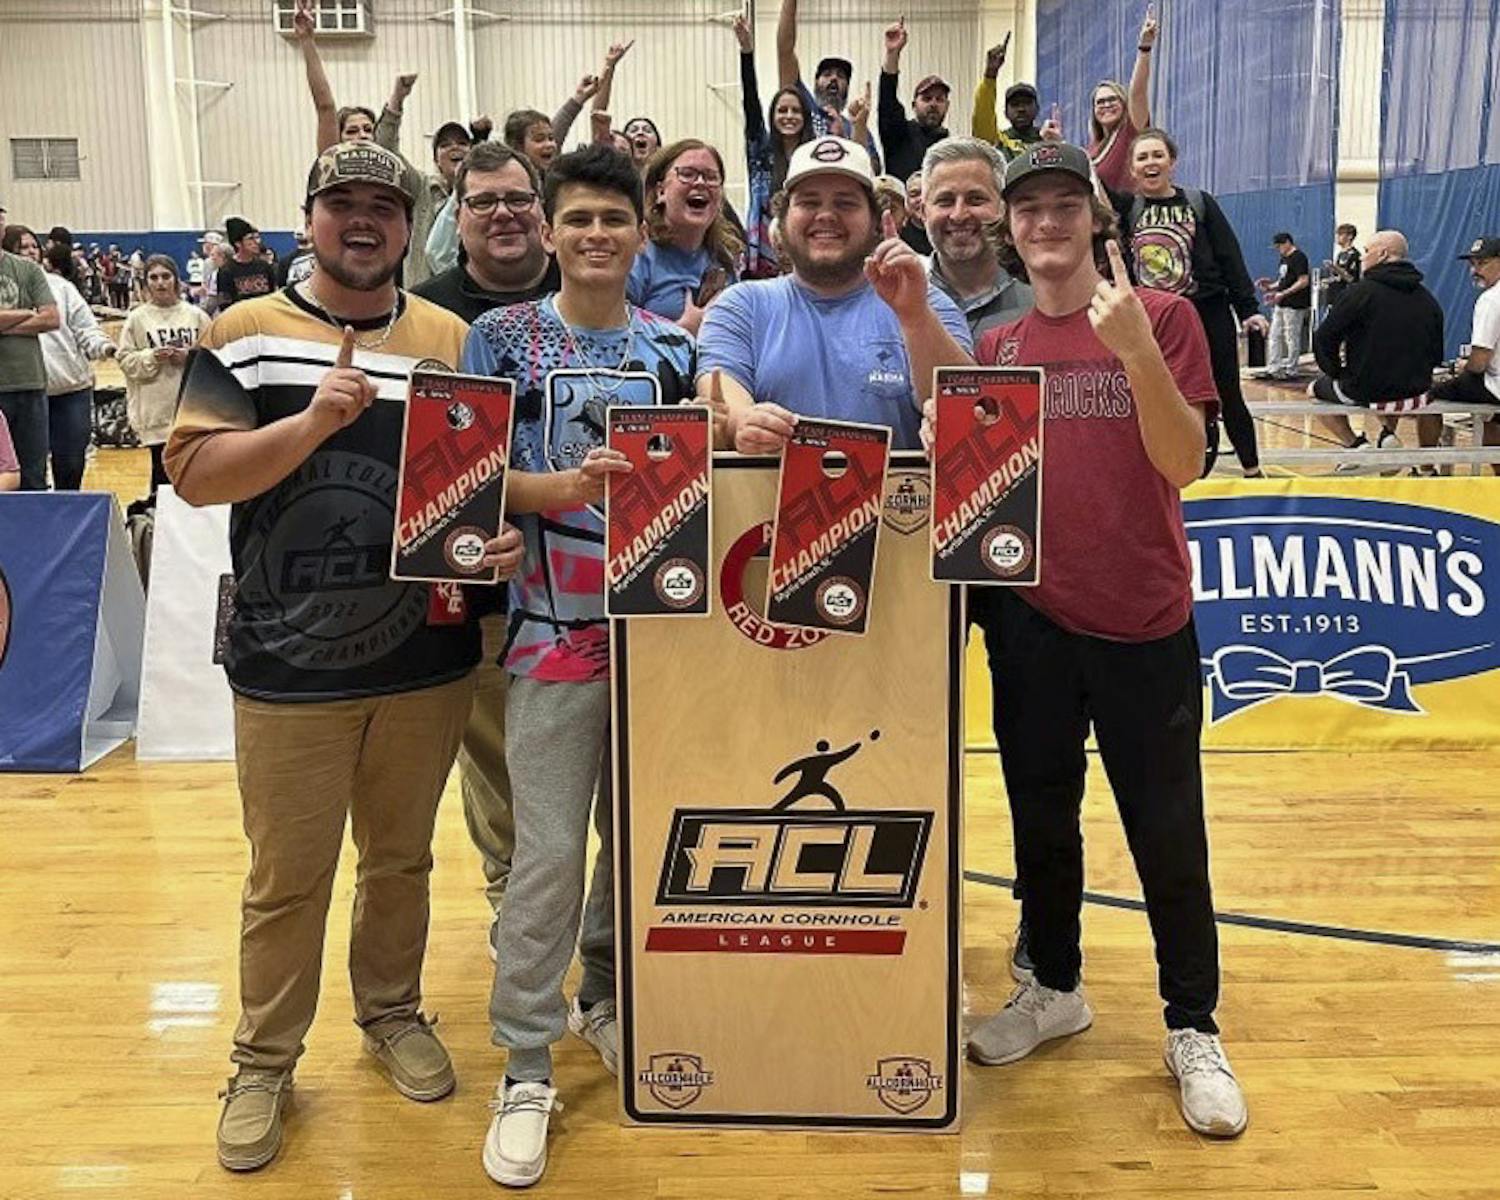 Left to right: Fourth-year operations and supply chain student Diego Franklin, third-year sport and entertainment management student Angel Camarena, 2022 mechanical engineering graduate Avery Snipes and first-year sport and entertainment management student Nolan Cochran pose after winning the National College Cornhole Championship team event on Dec. 31, 2022. The Gamecocks earned a 5-1 match record and a 13-5 mark in individual games en route to the title.